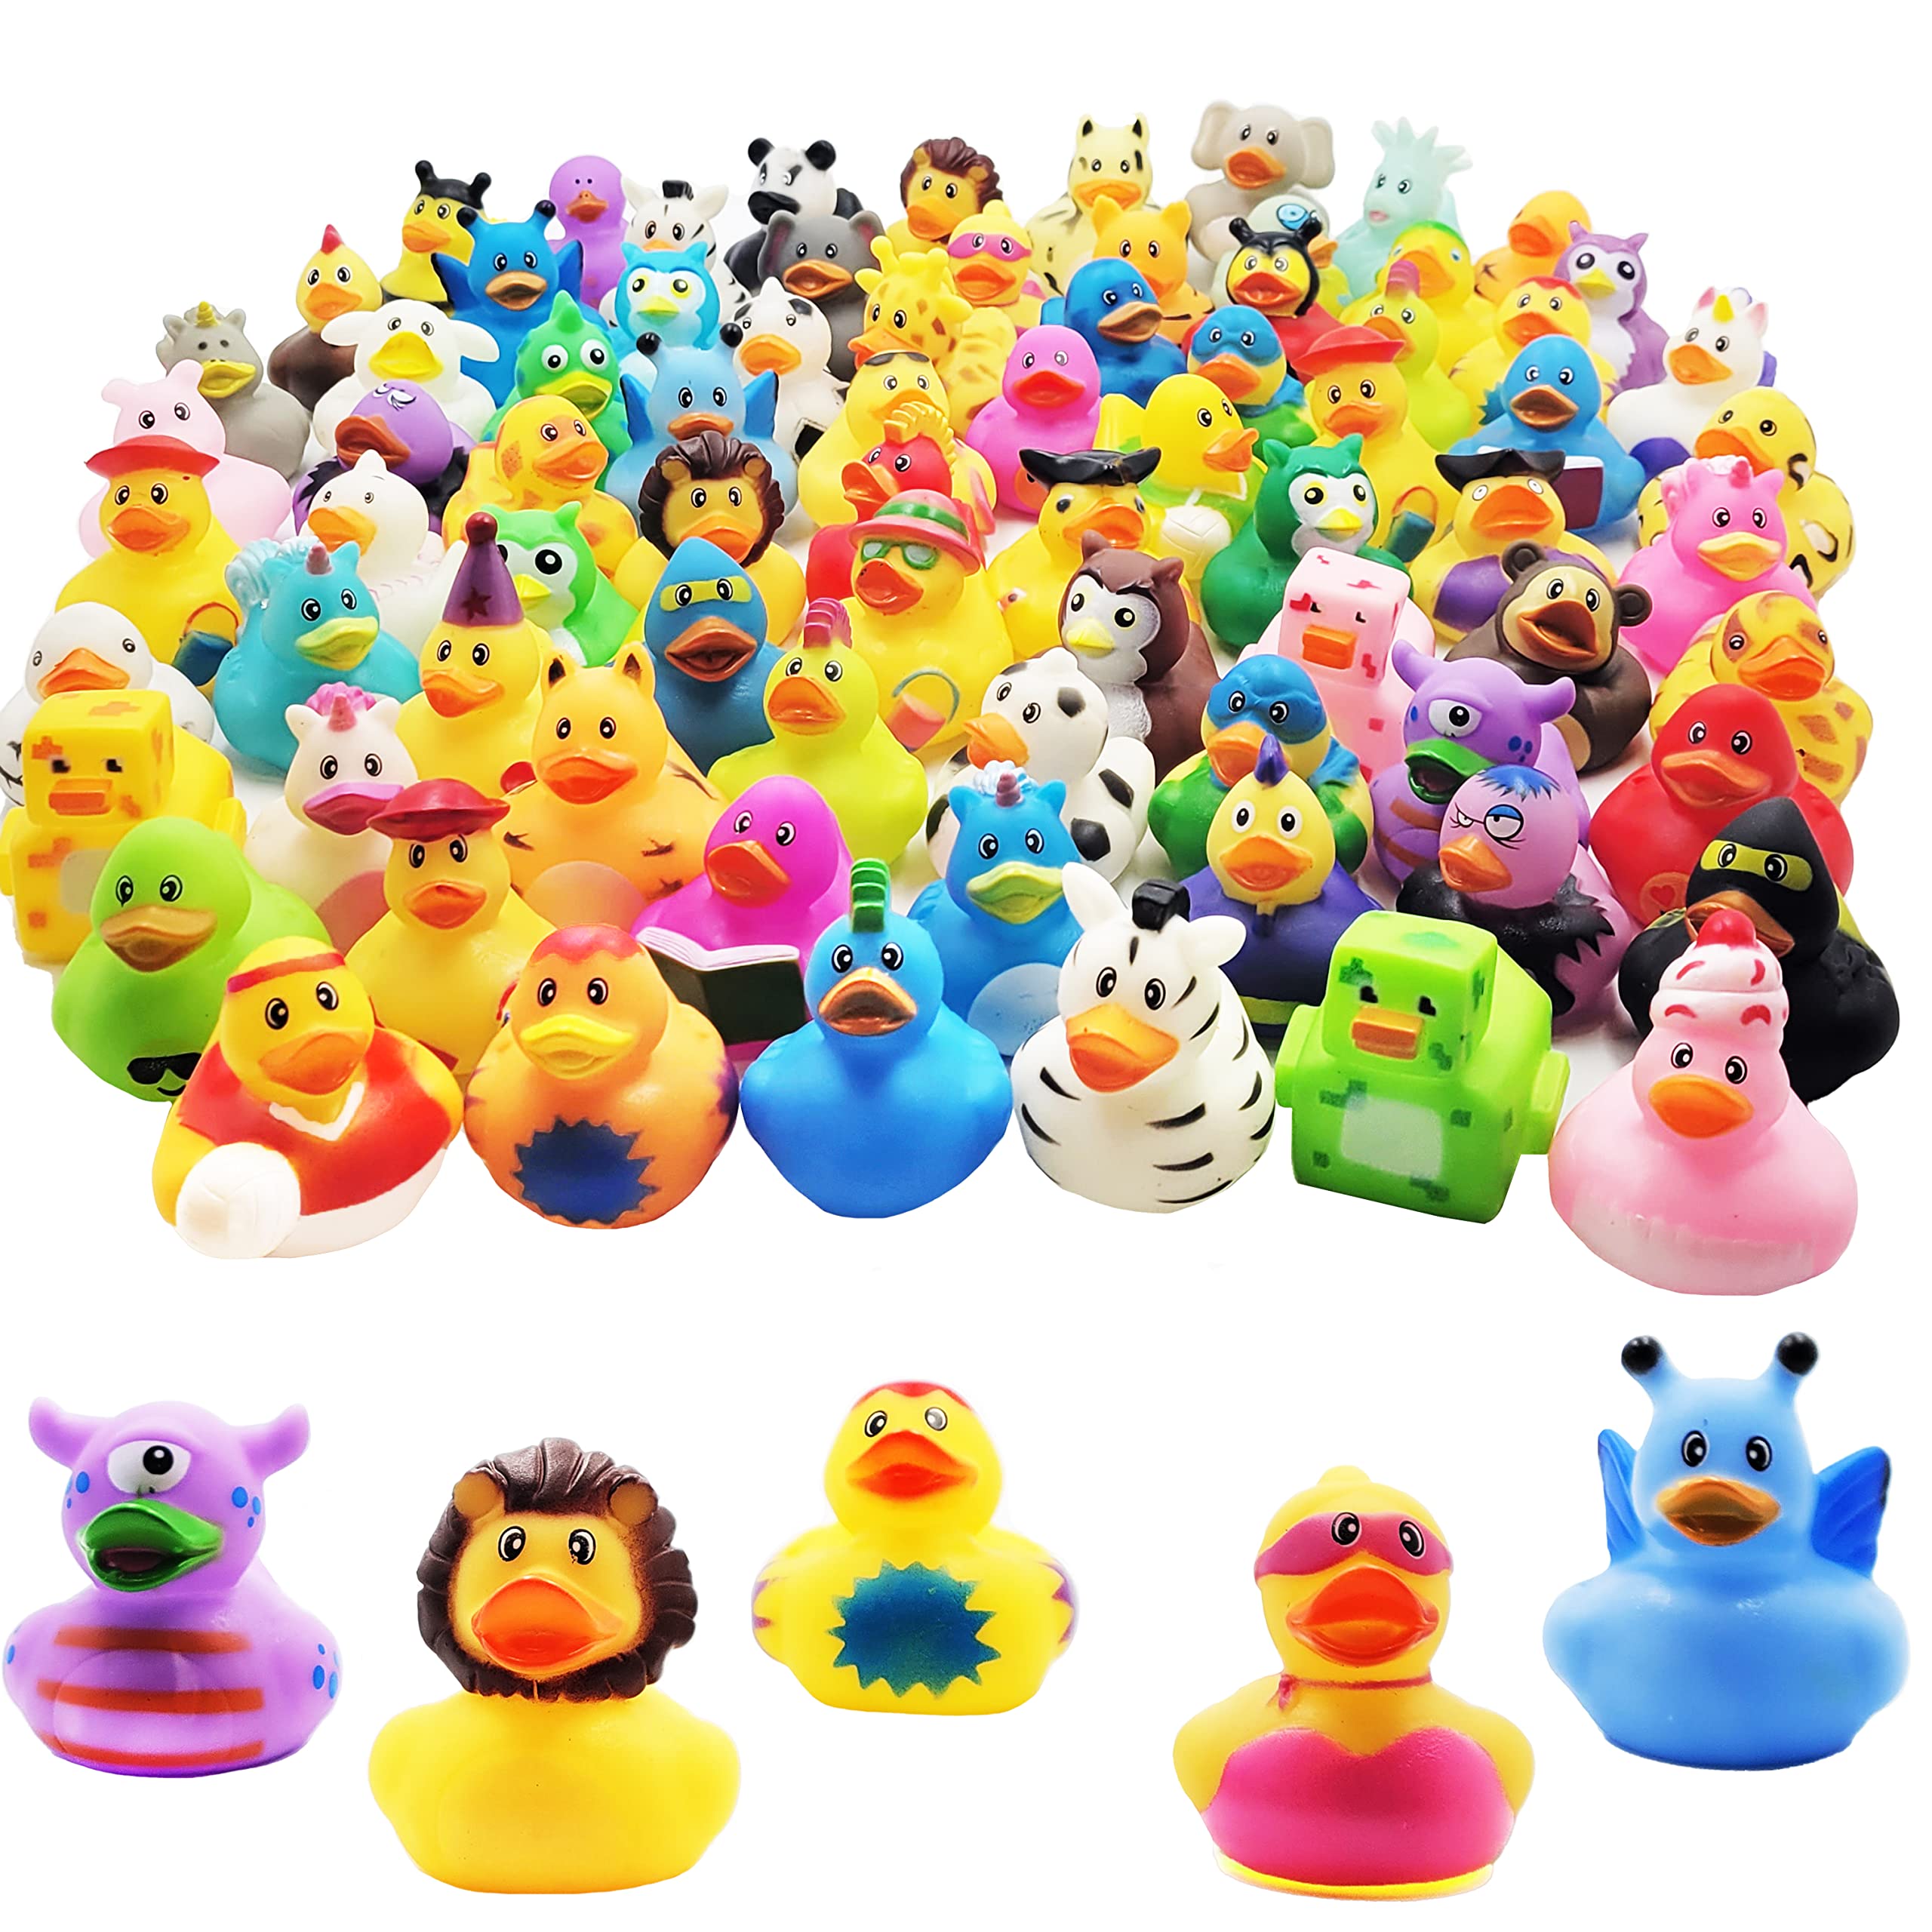 The Dreidel Company Assortment Rubber Duck Toy Duckies for Kids, Bath Birthday Gifts Baby Showers Classroom Incentives, Summer Beach and Pool Activity, 2